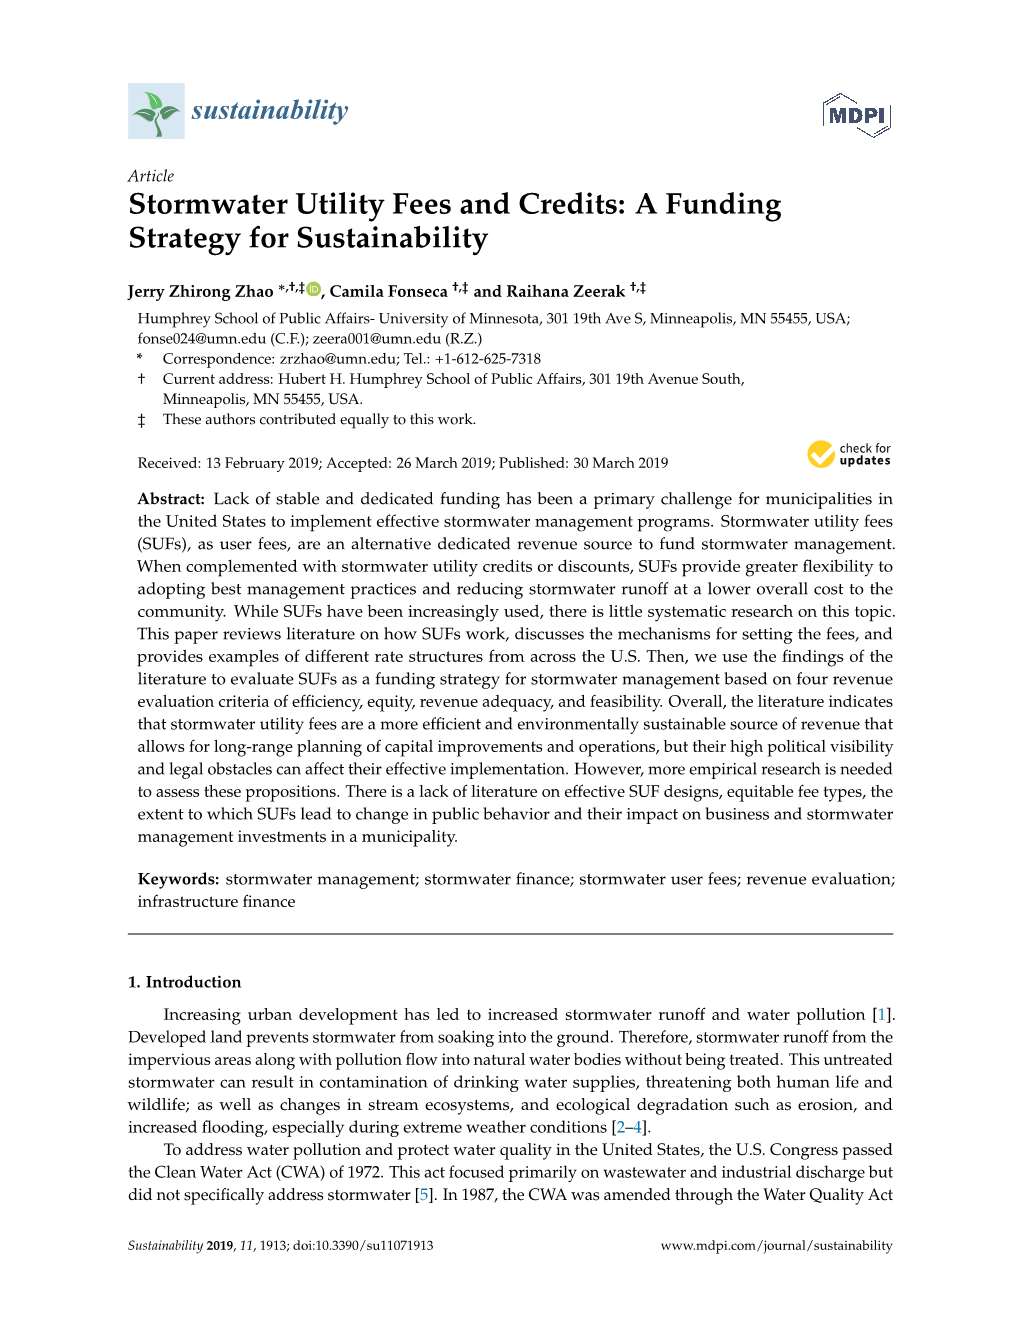 Stormwater Utility Fees and Credits: a Funding Strategy for Sustainability